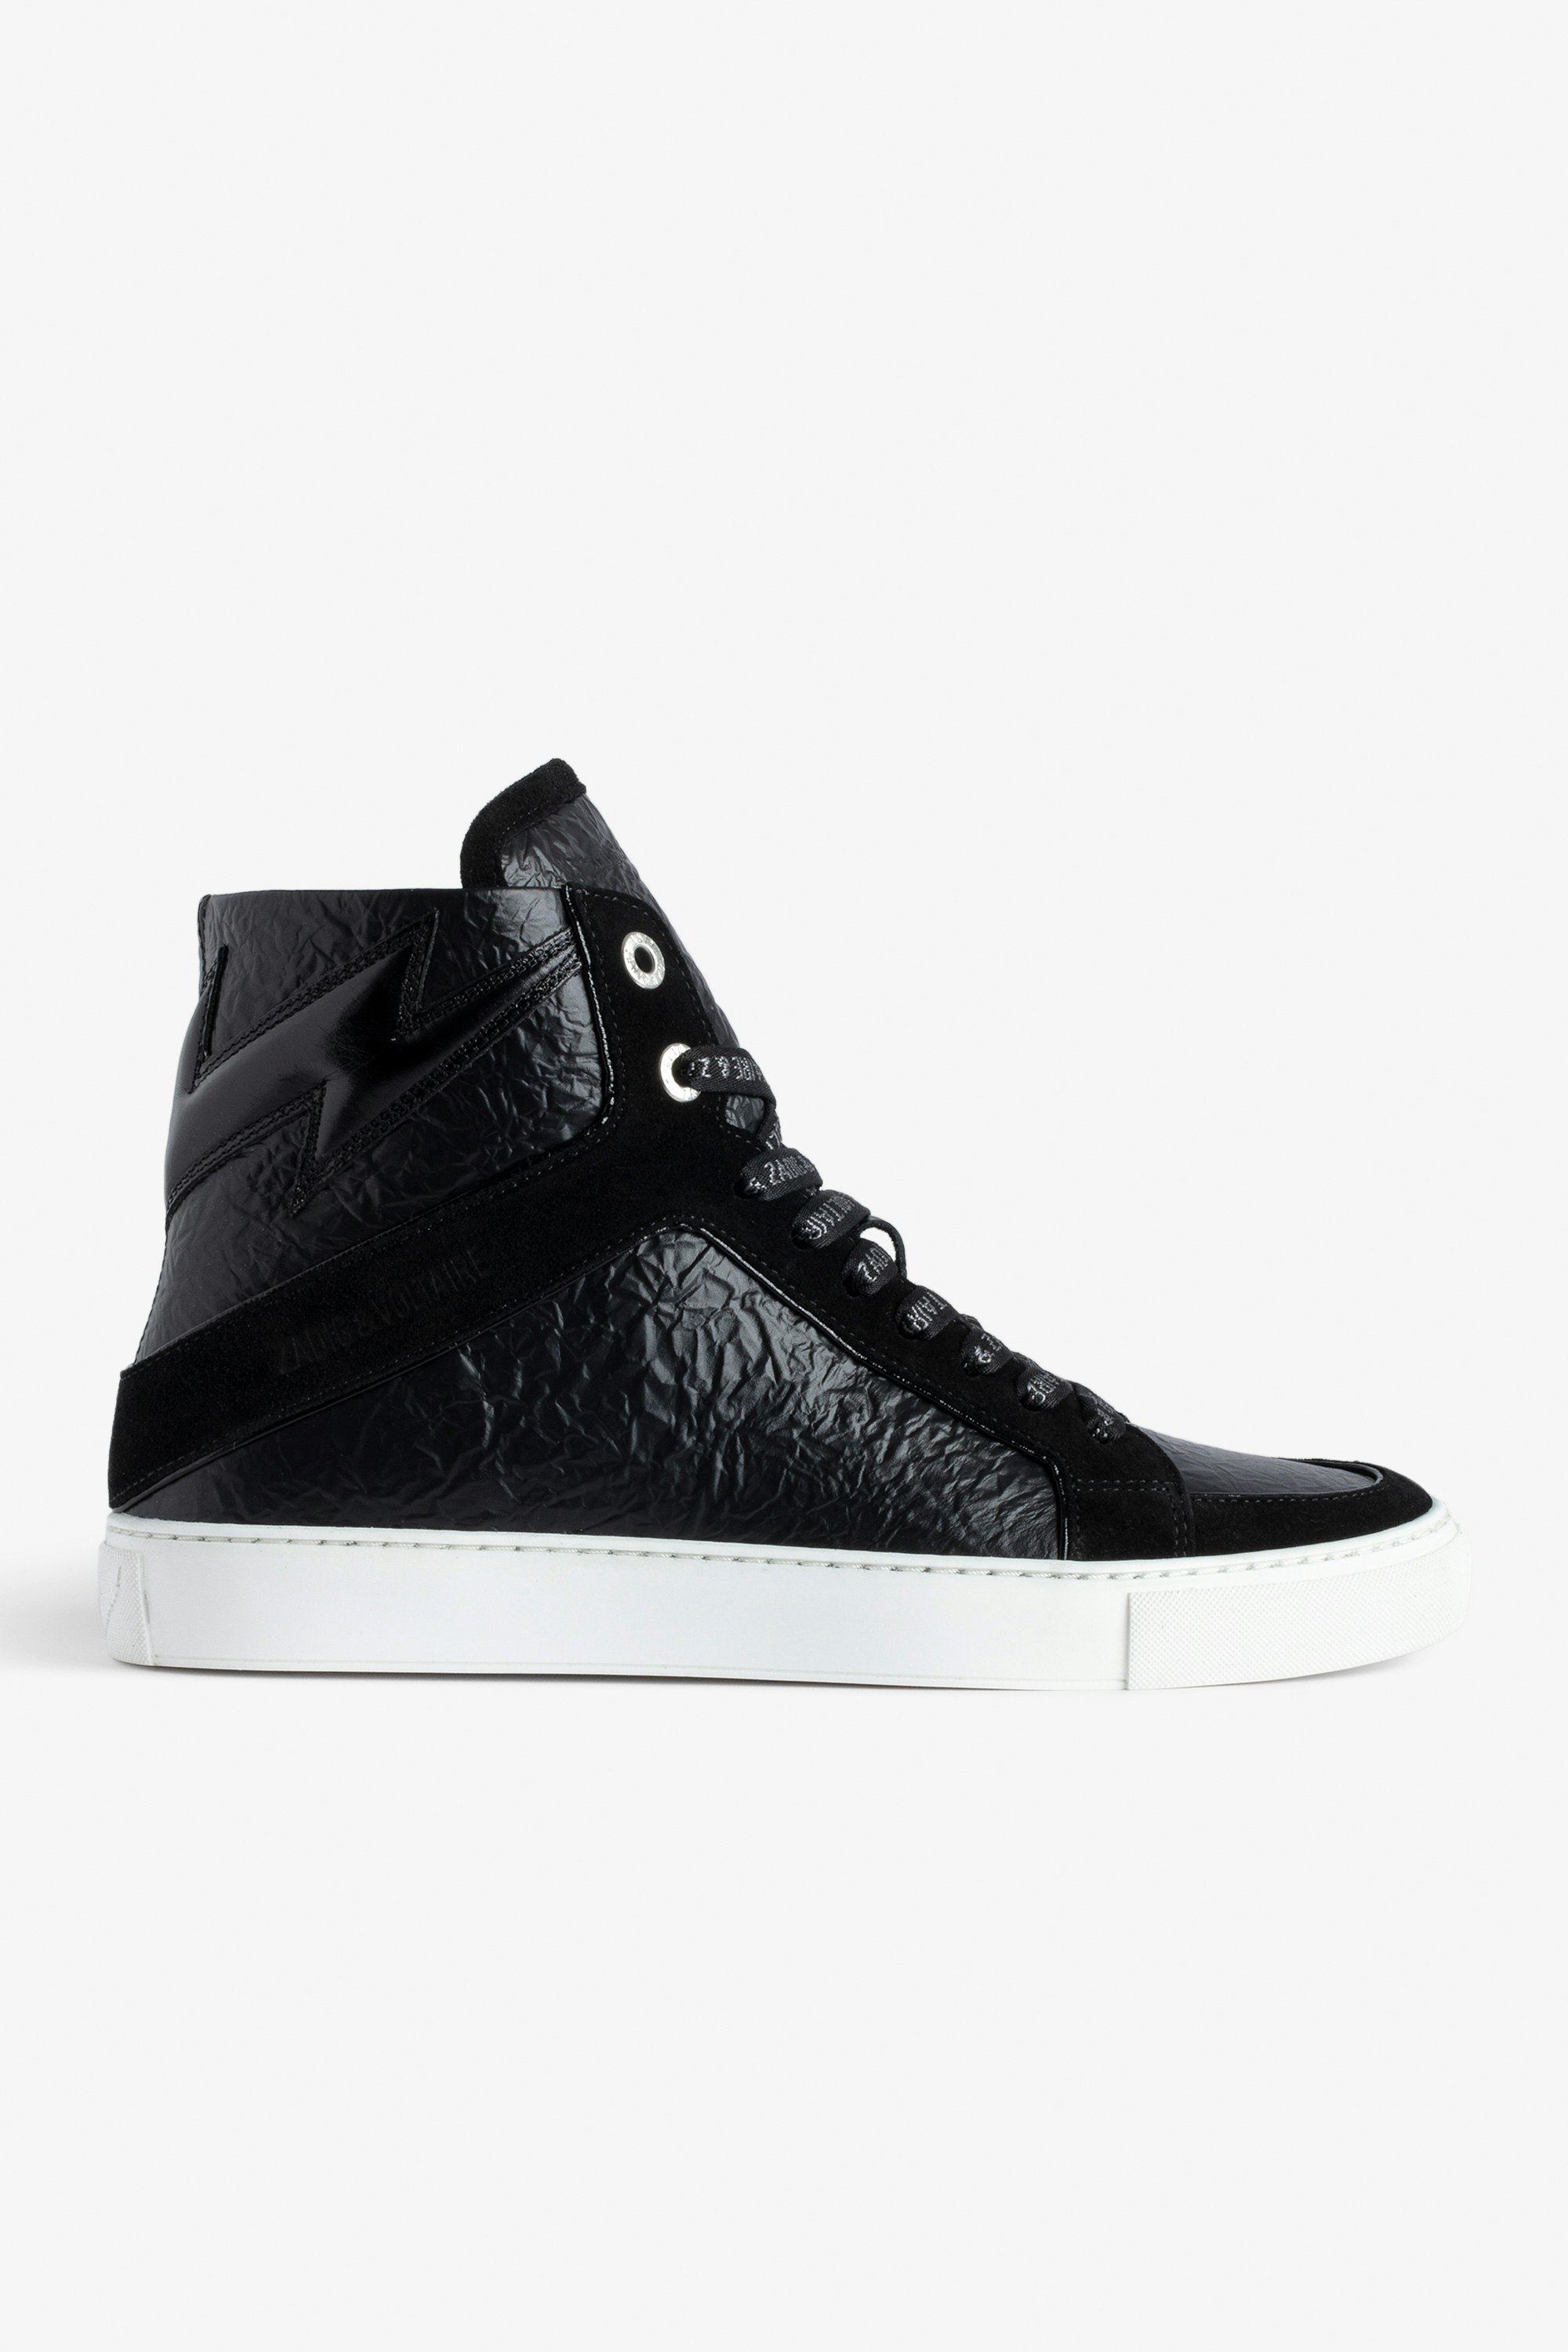 ZV1747 High Flash High-Top Crinkled Sneakers  - Women’s black distressed leather high-top sneakers with lightning bolt and suede panels.